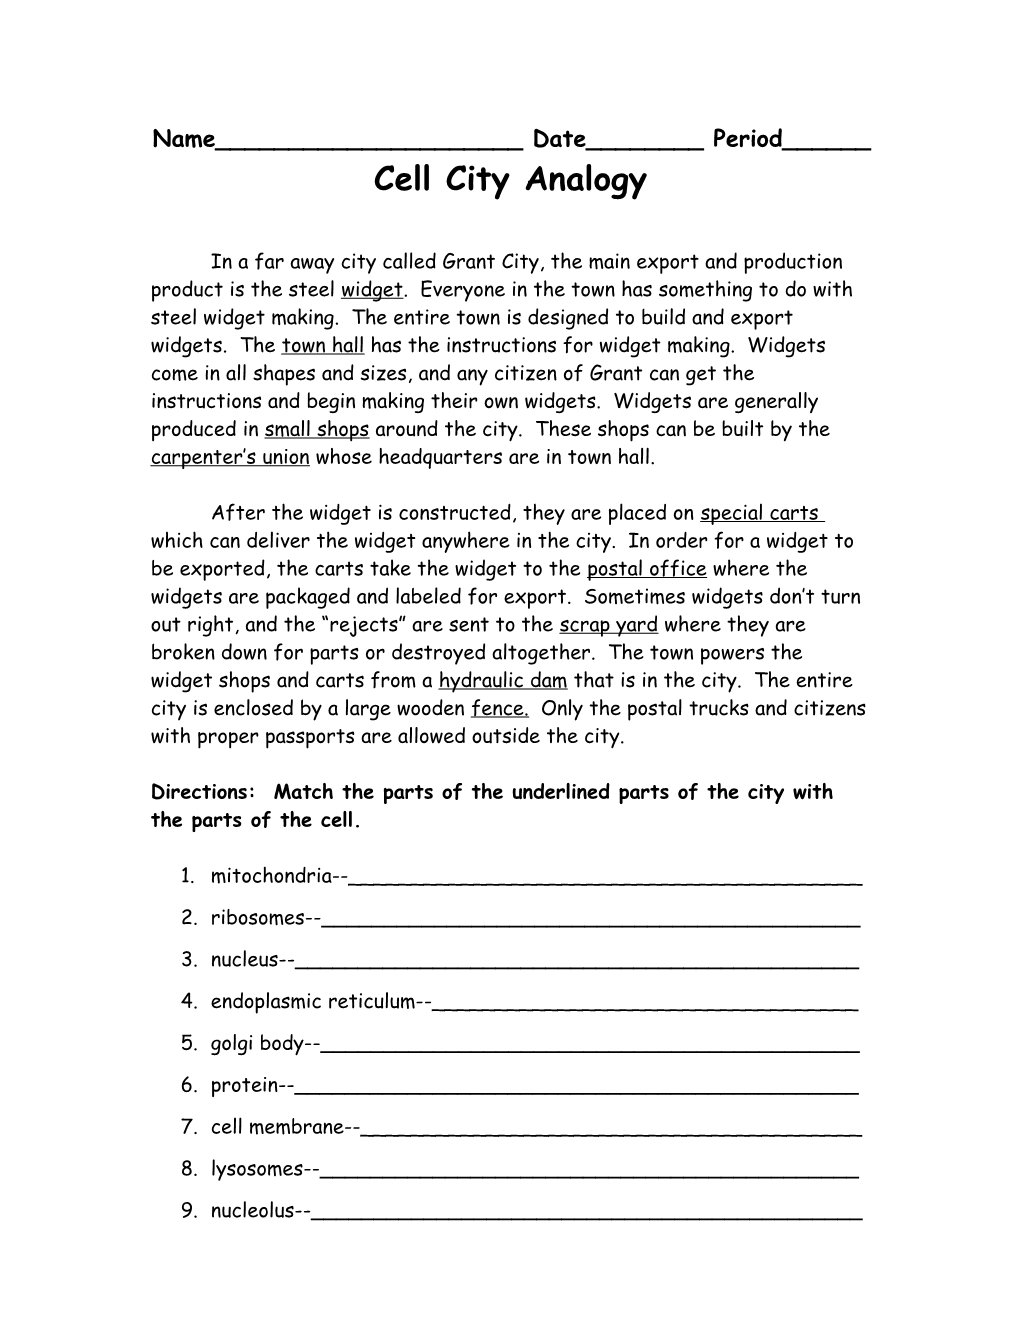 Cell City Analogy s1